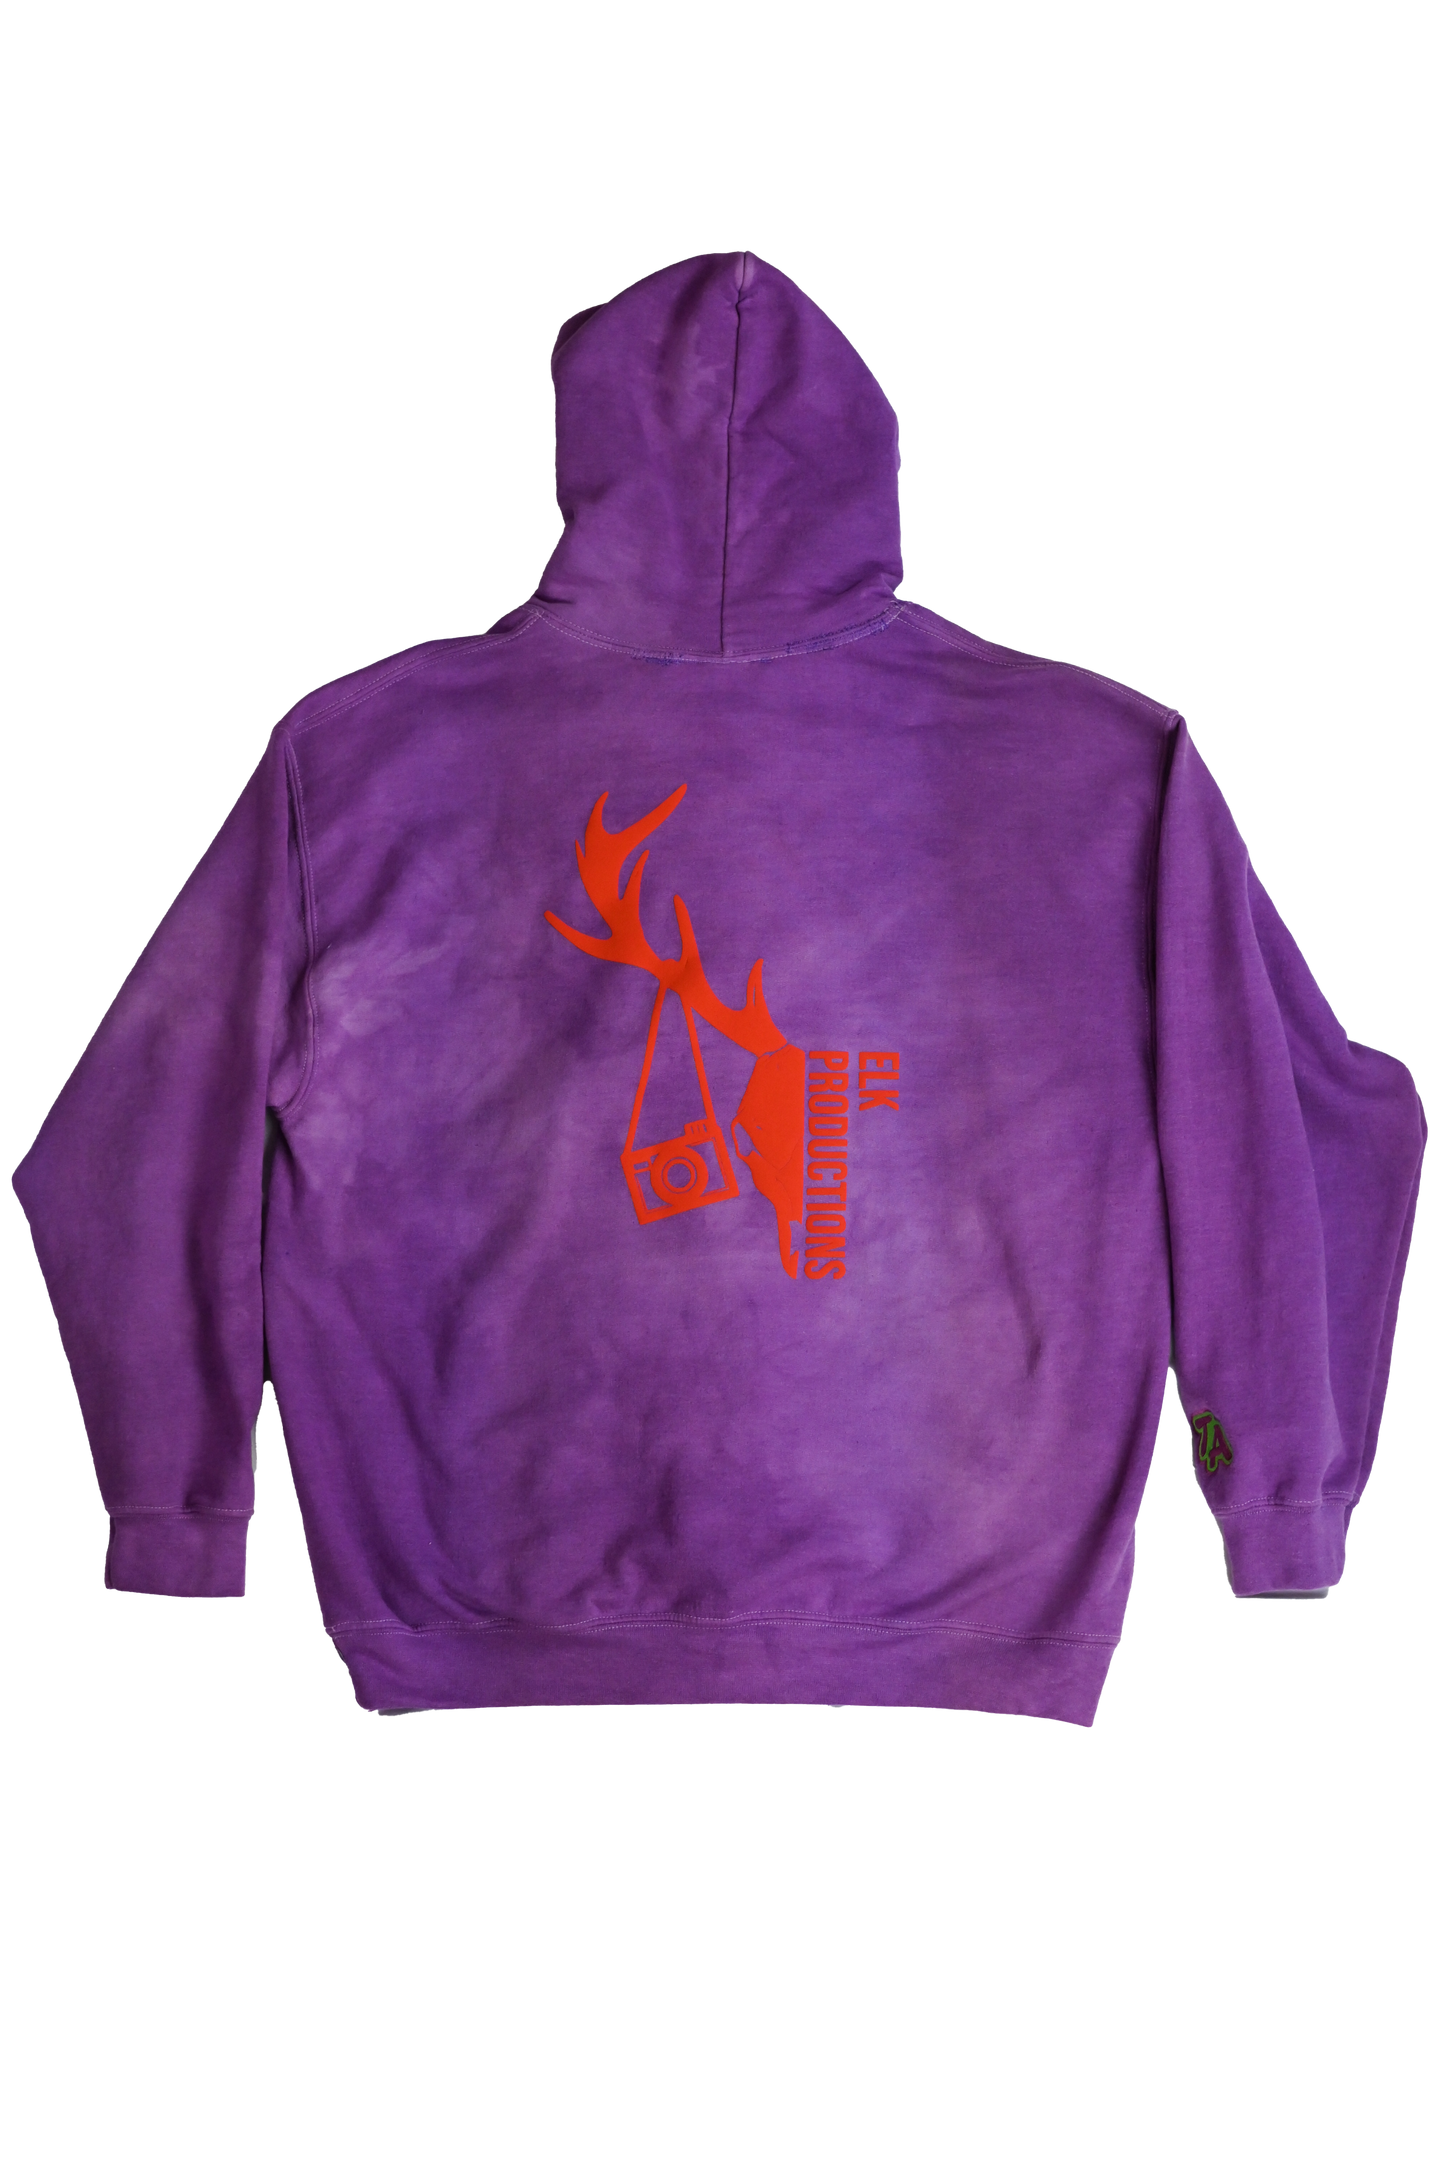 ROUND TWO ELKIES Thanks Alot for ELK Productions Hooded Sweatshirt